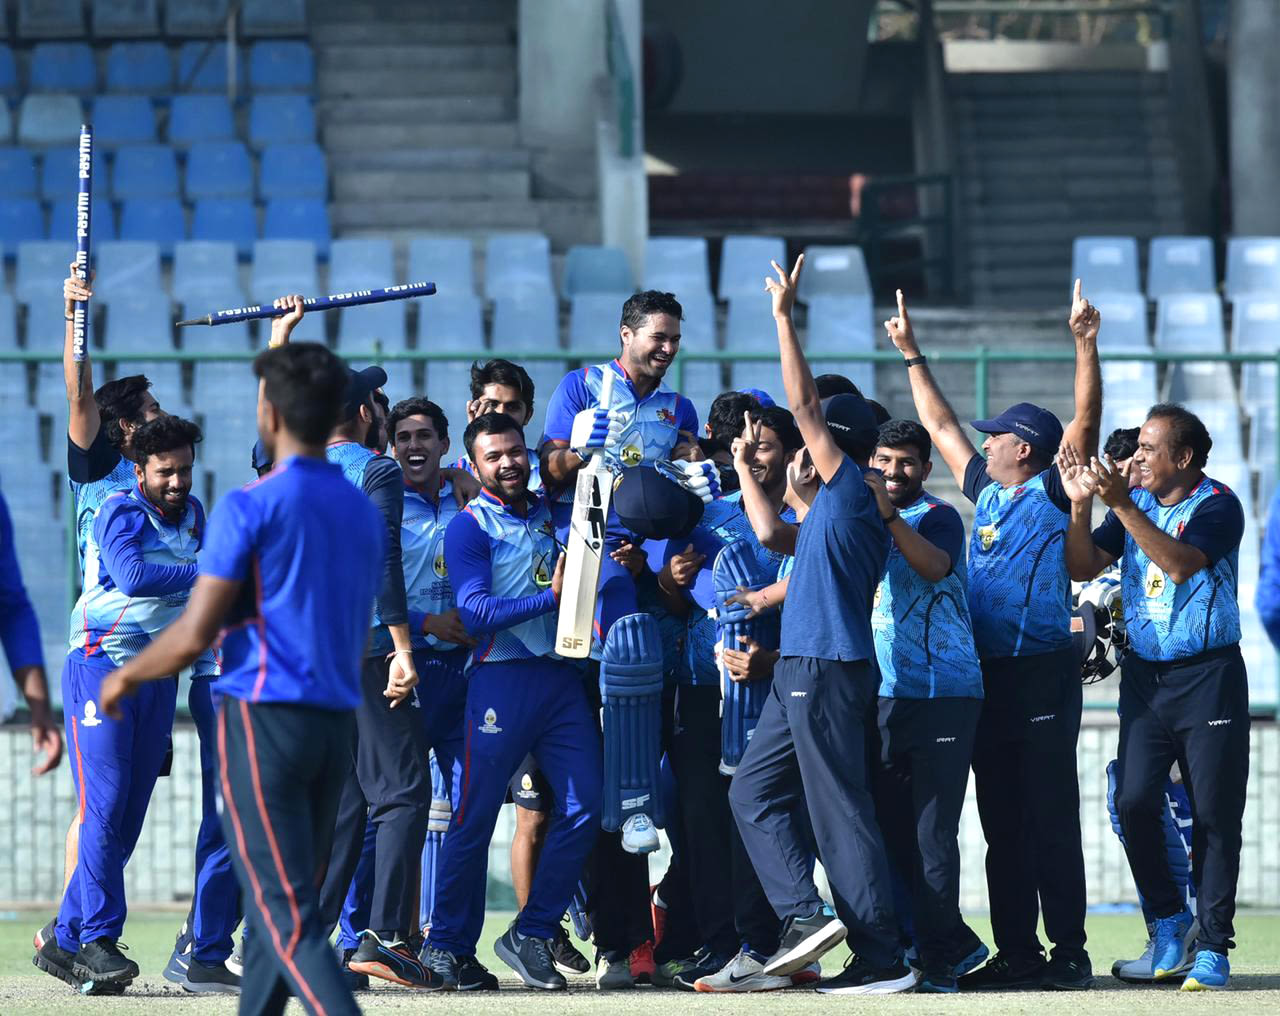 Aditya Tare is chaired off the field by his team-mates after scoring a match-winning century in the final, Delhi, March 14, 2021